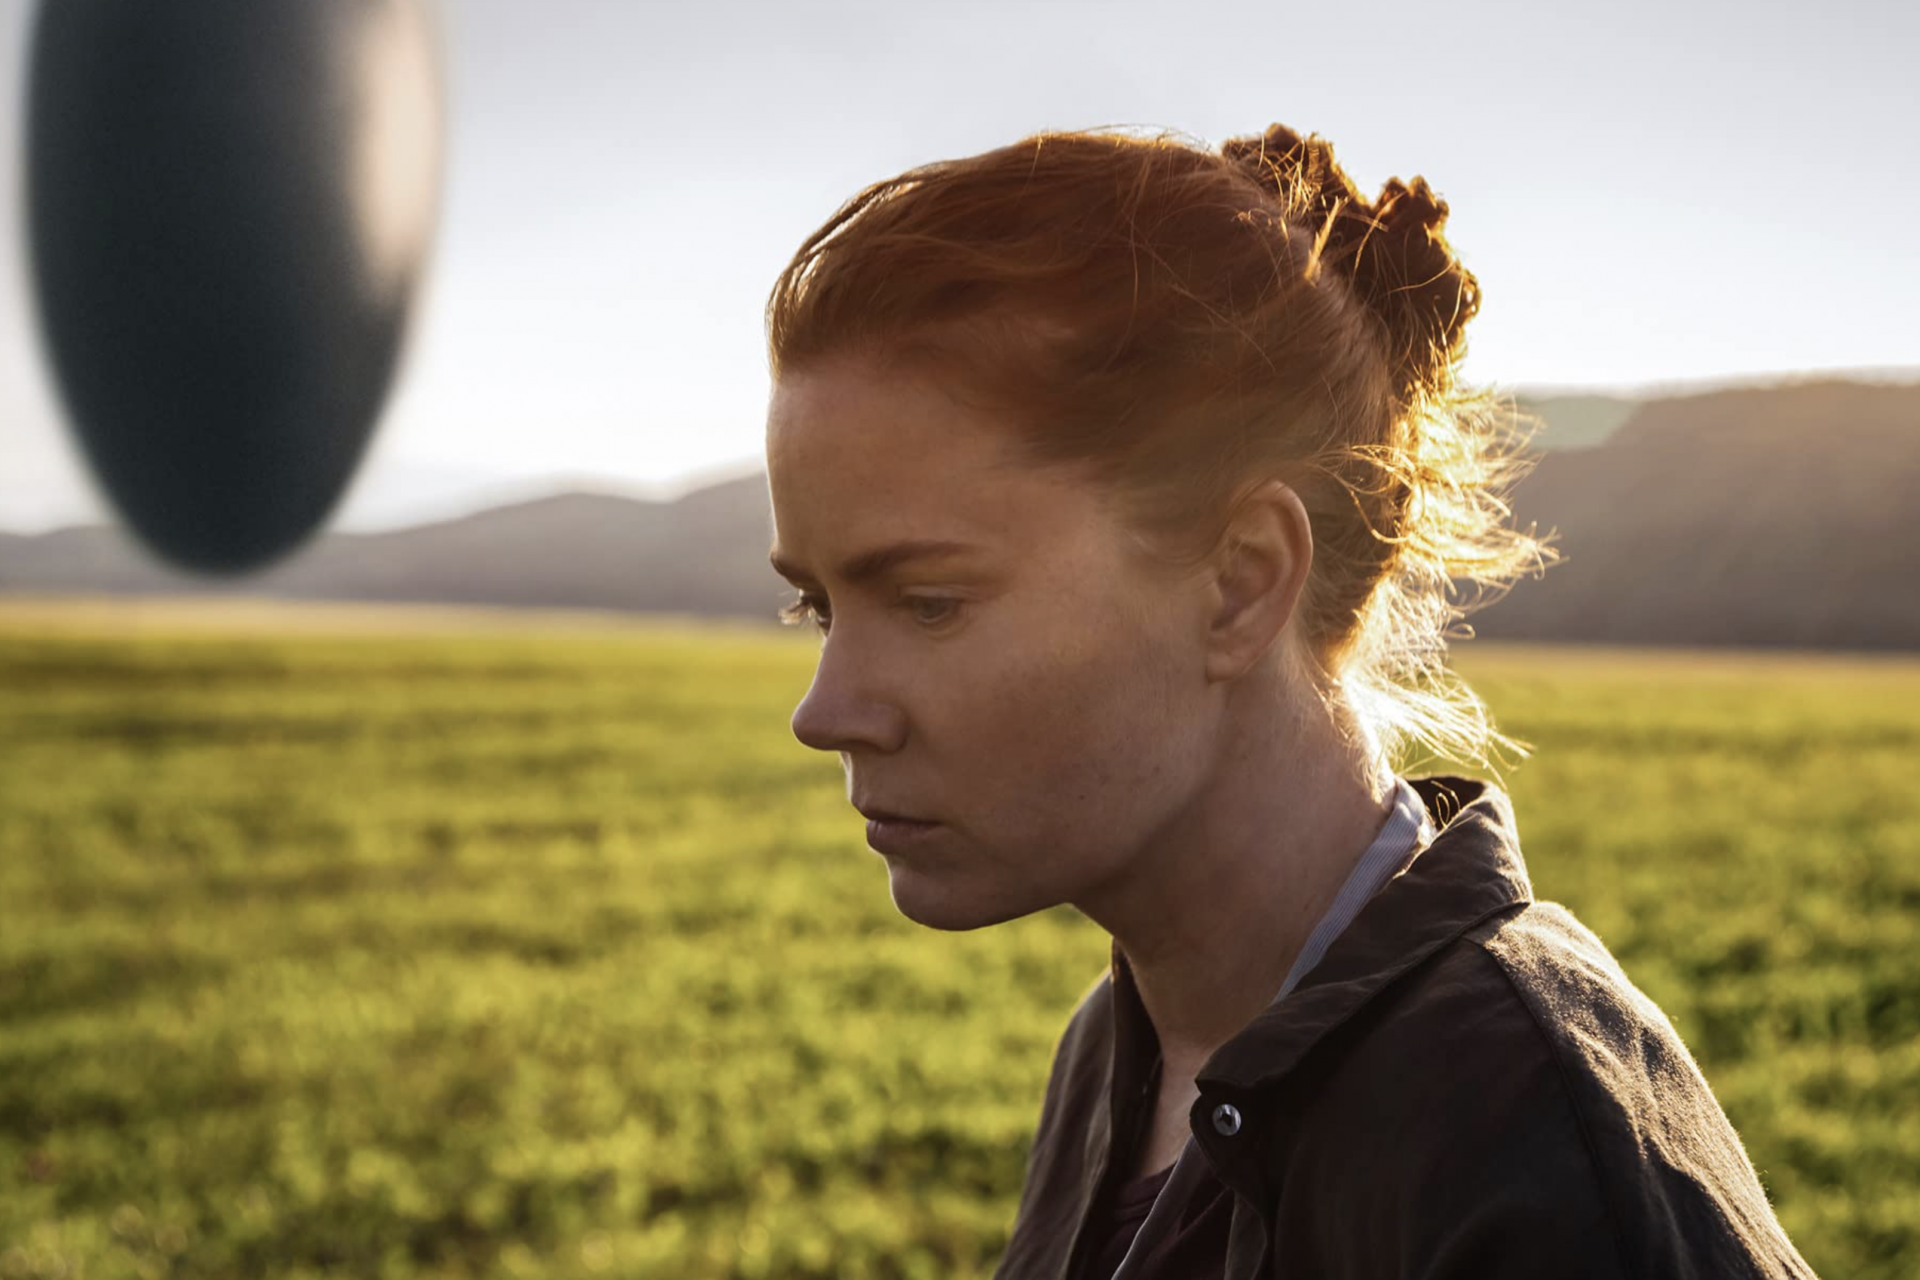 <p>Arrival - A contemporary classic in which aliens arrive on Earth with an a priori indecipherable message that turns out to be related to time.</p> <p>Photo: Paramount Pictures</p>